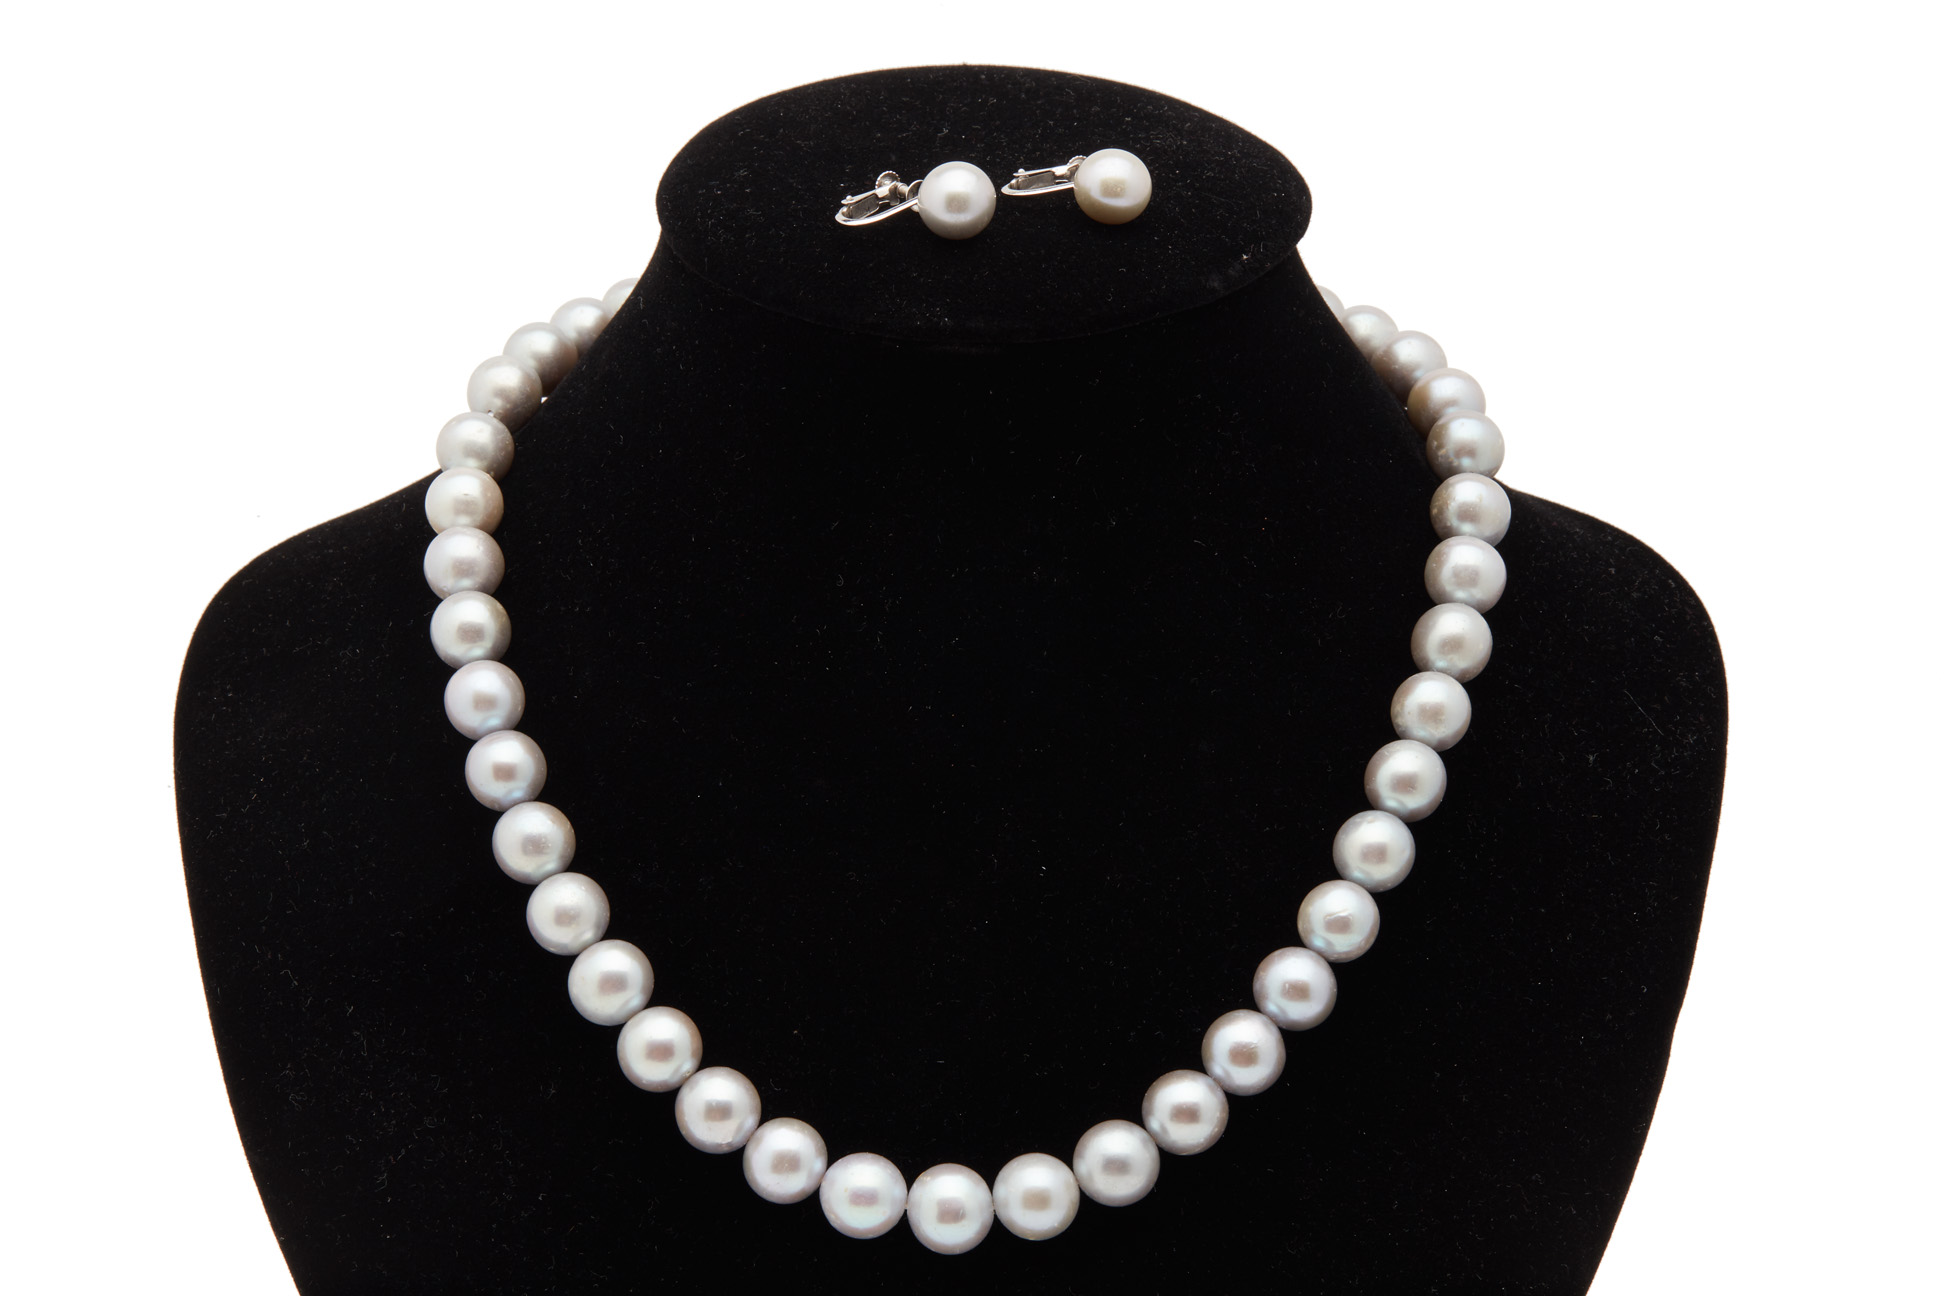 AN GREY AKOYA CULTURED PEARL NECKLACE & EARRINGS